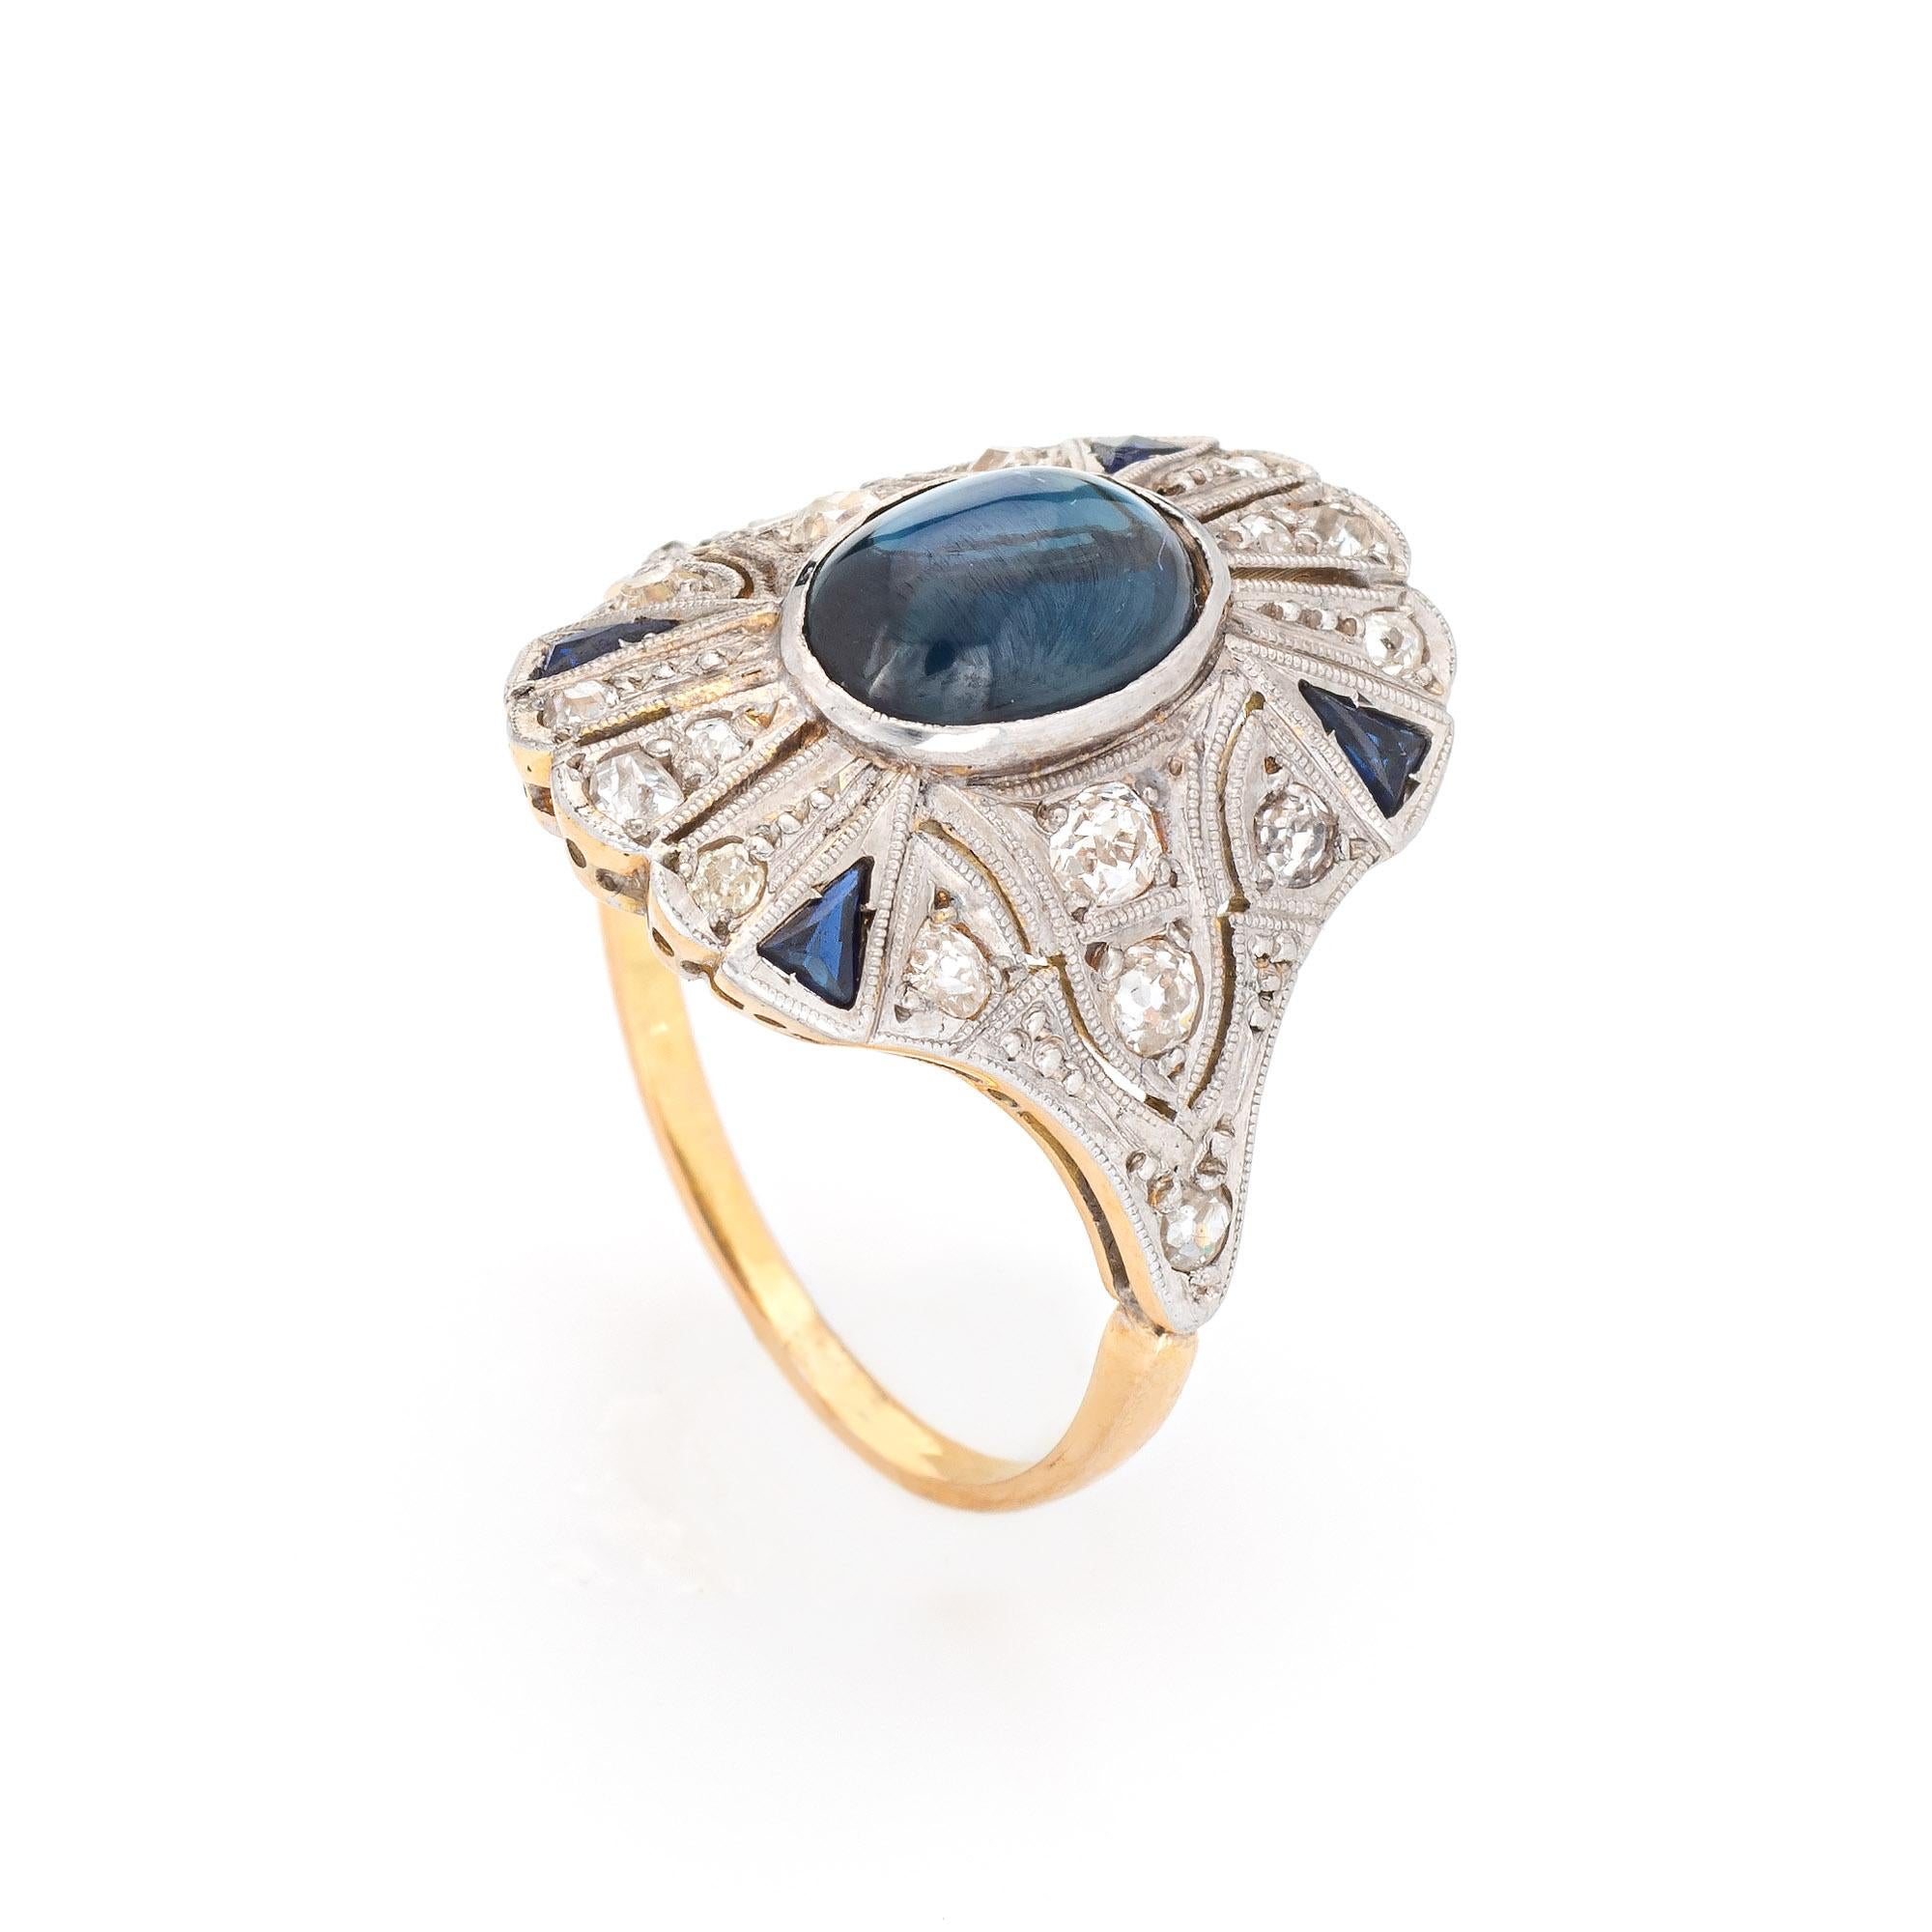 Stylish 2.40ct natural cabochon sapphire & diamond ring crafted in 18k yellow gold & platinum. 

Cabochon cut natural star sapphire, 2.40ct (9.5 x 6.5 x 3.6mm), dark green-blue color, nearly flawless, good polish and symmetry, Australian origin, no